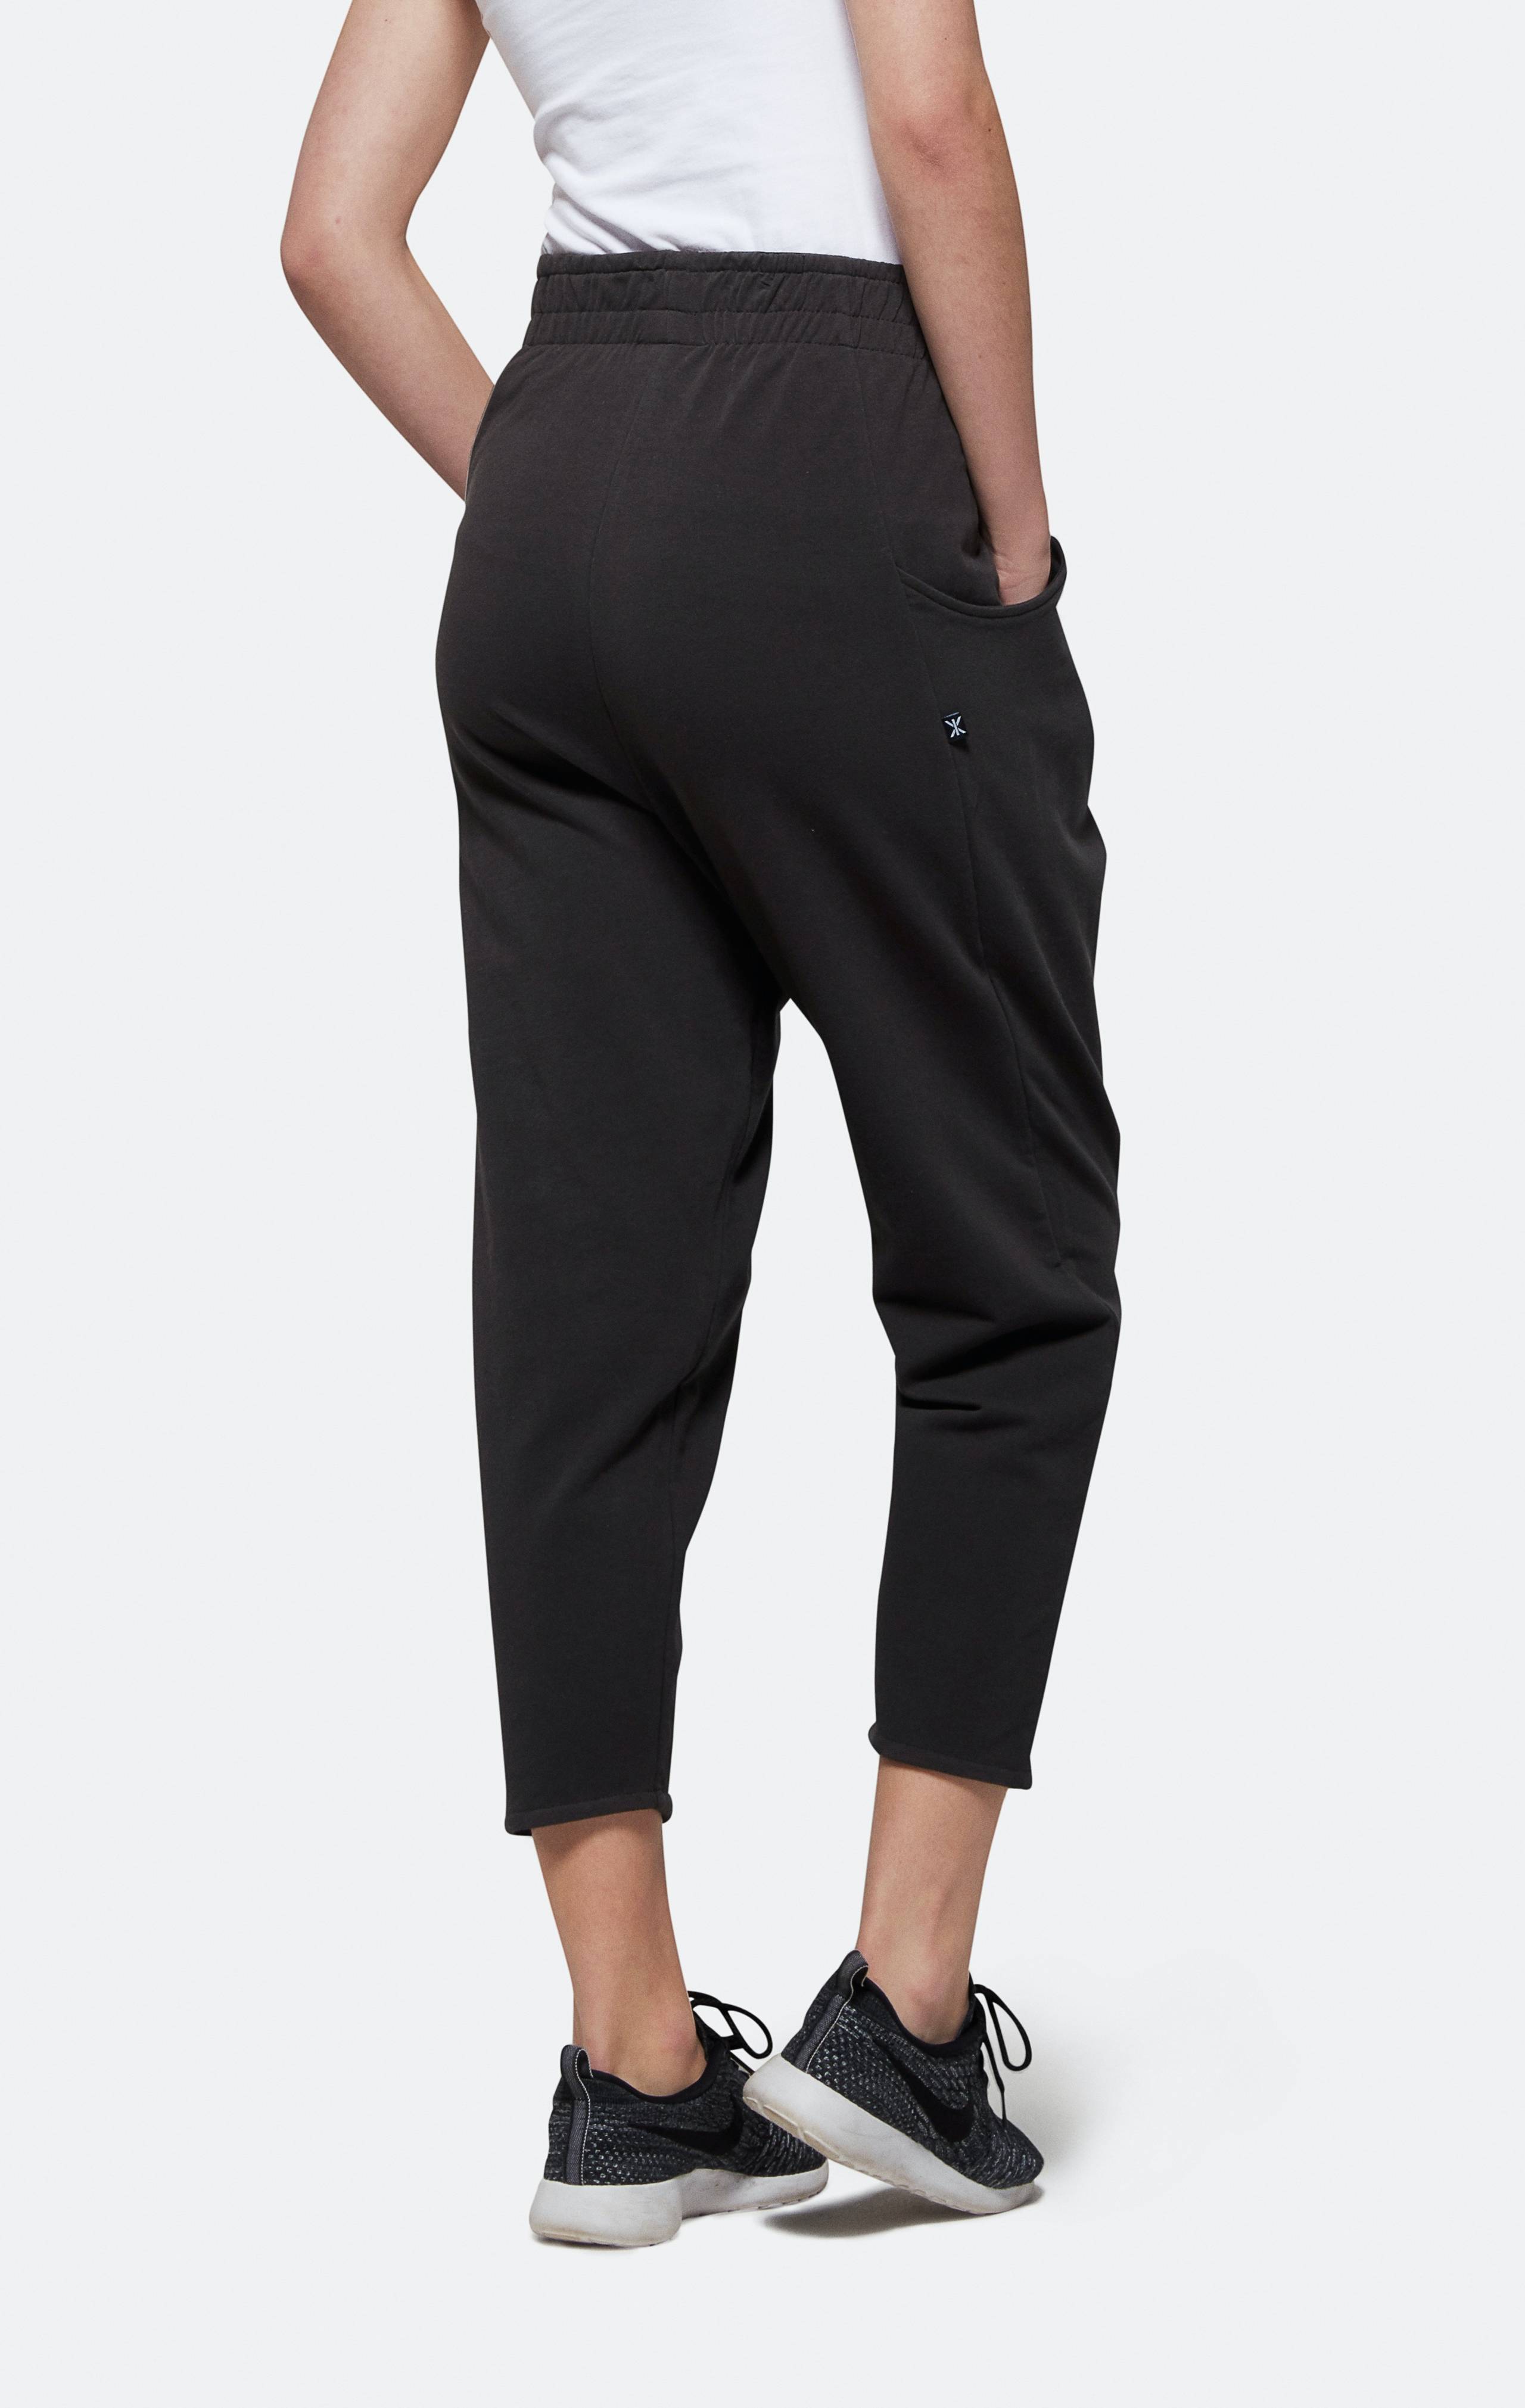 Onepiece Tag Pant CHARCOAL - 6